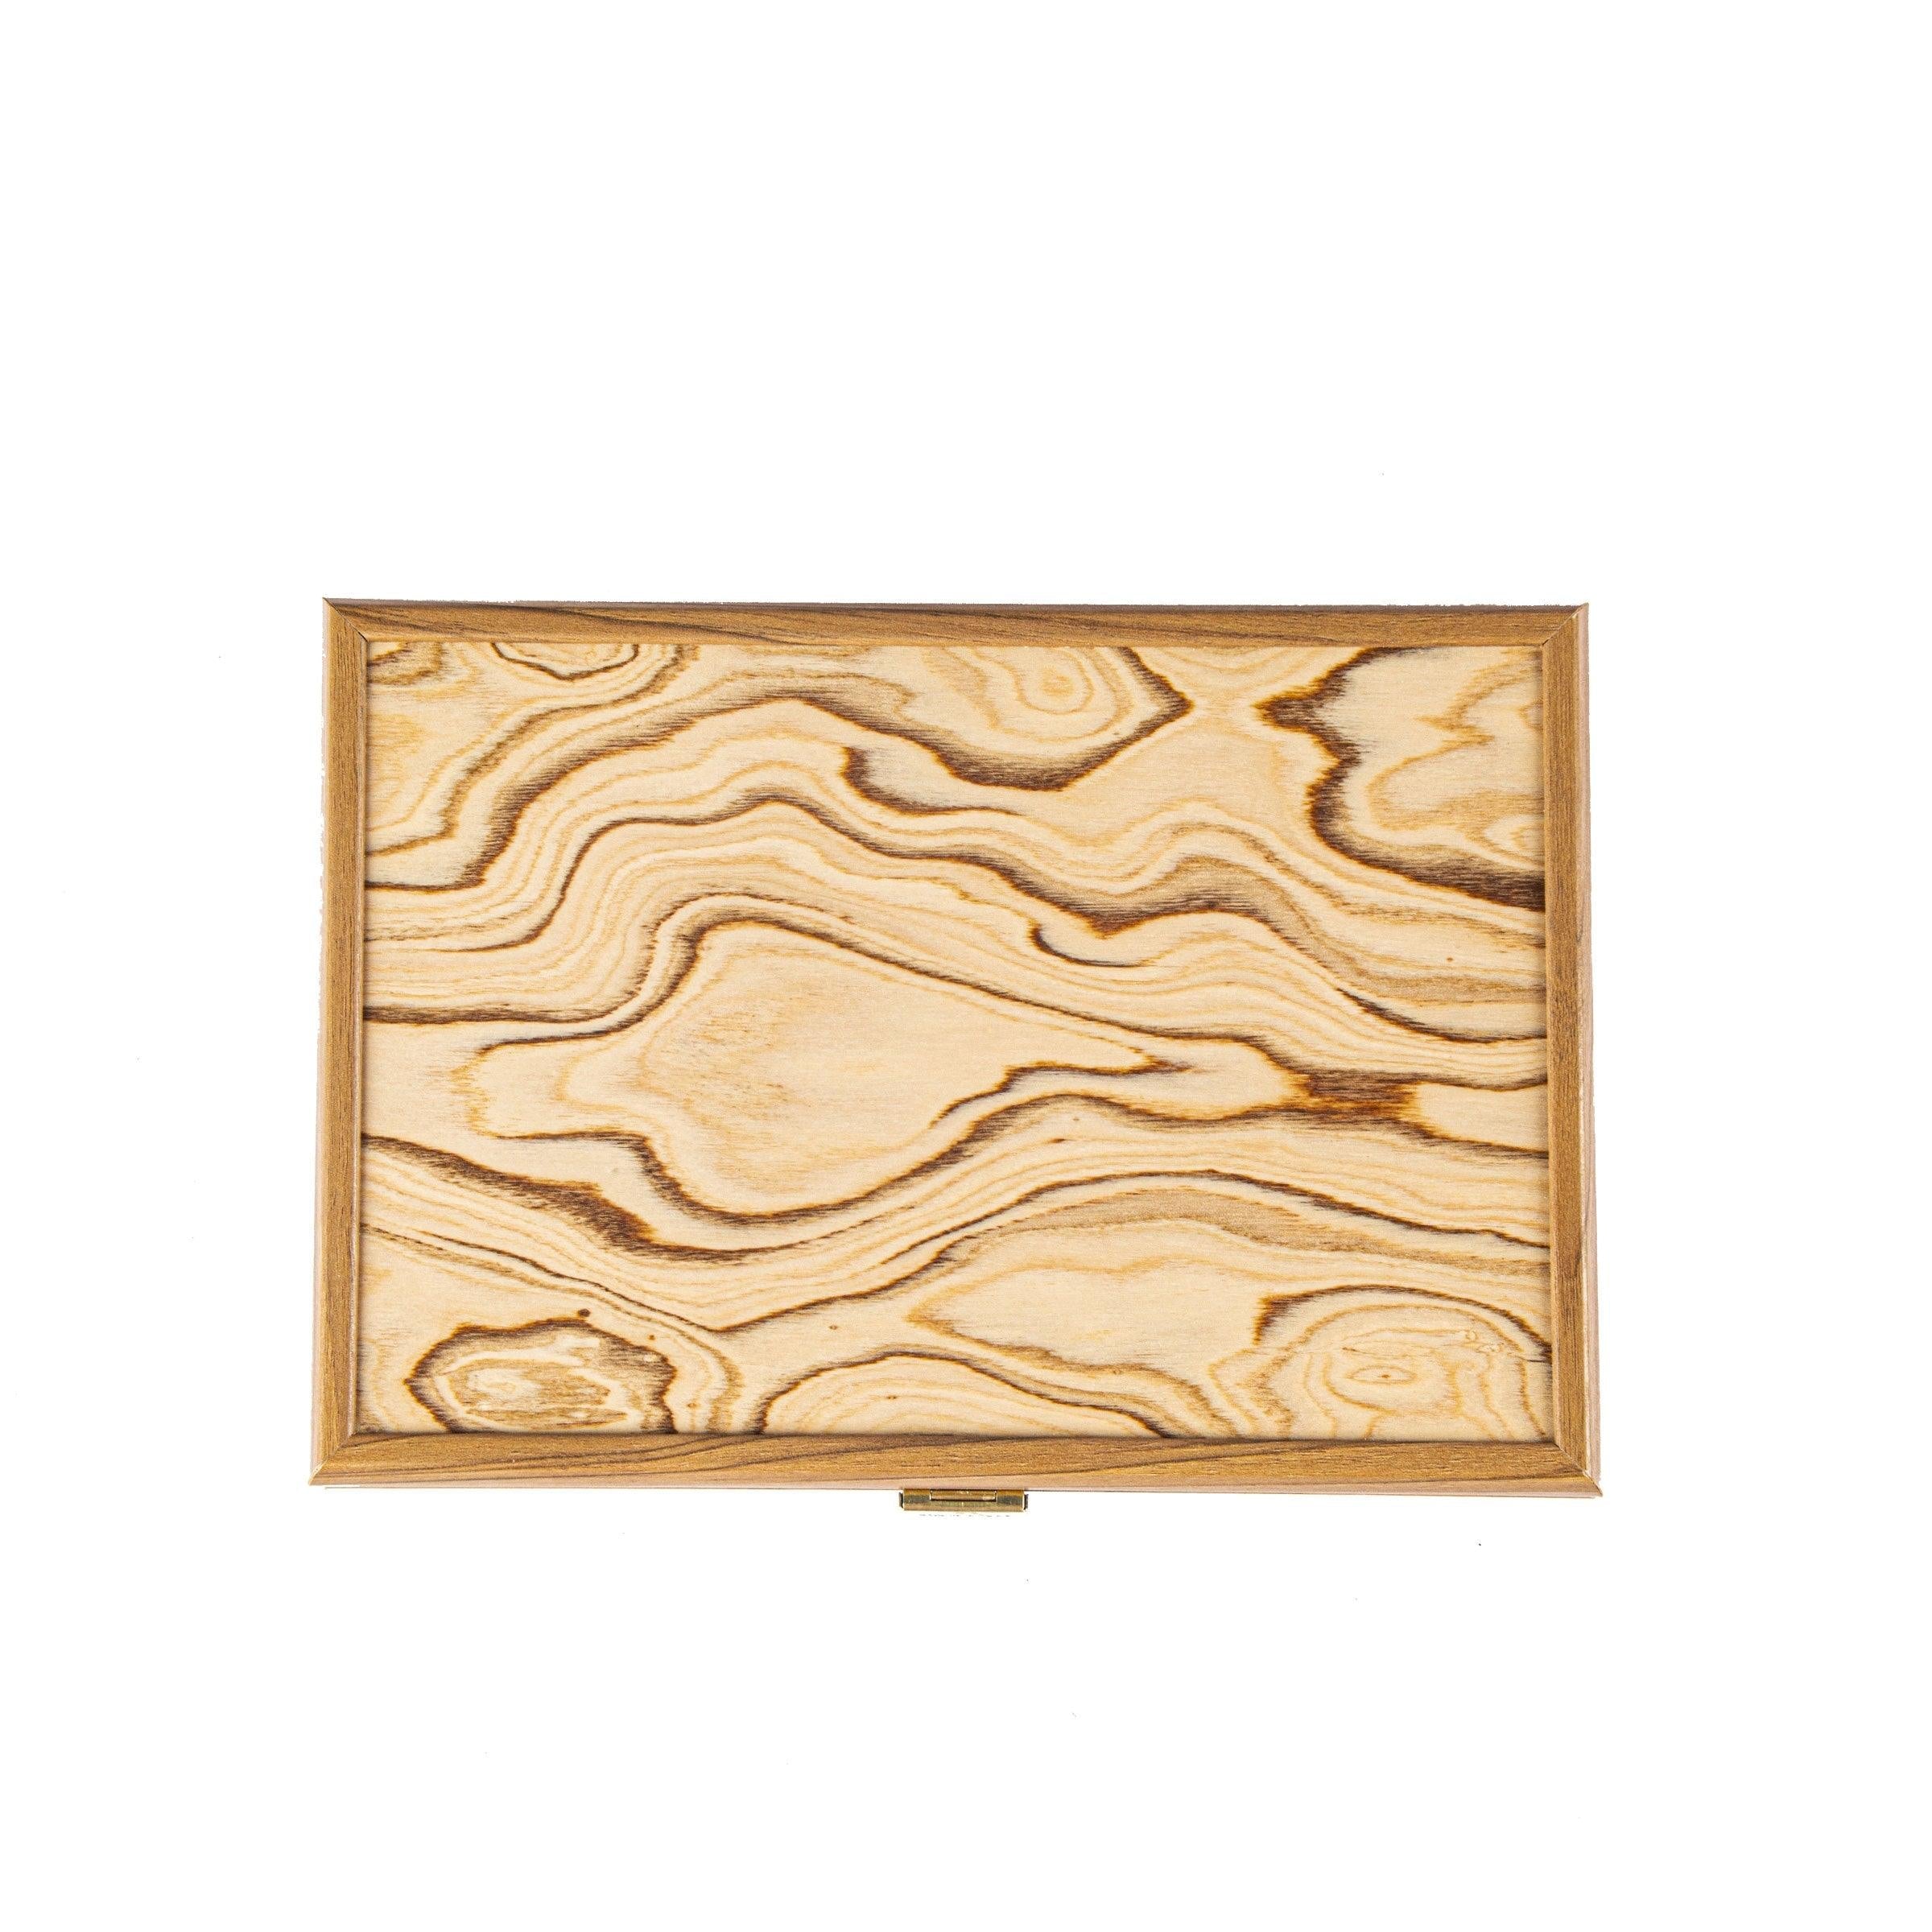 WALNUT WOODEN BOX with natural Italian Olive burl top - LAZADO